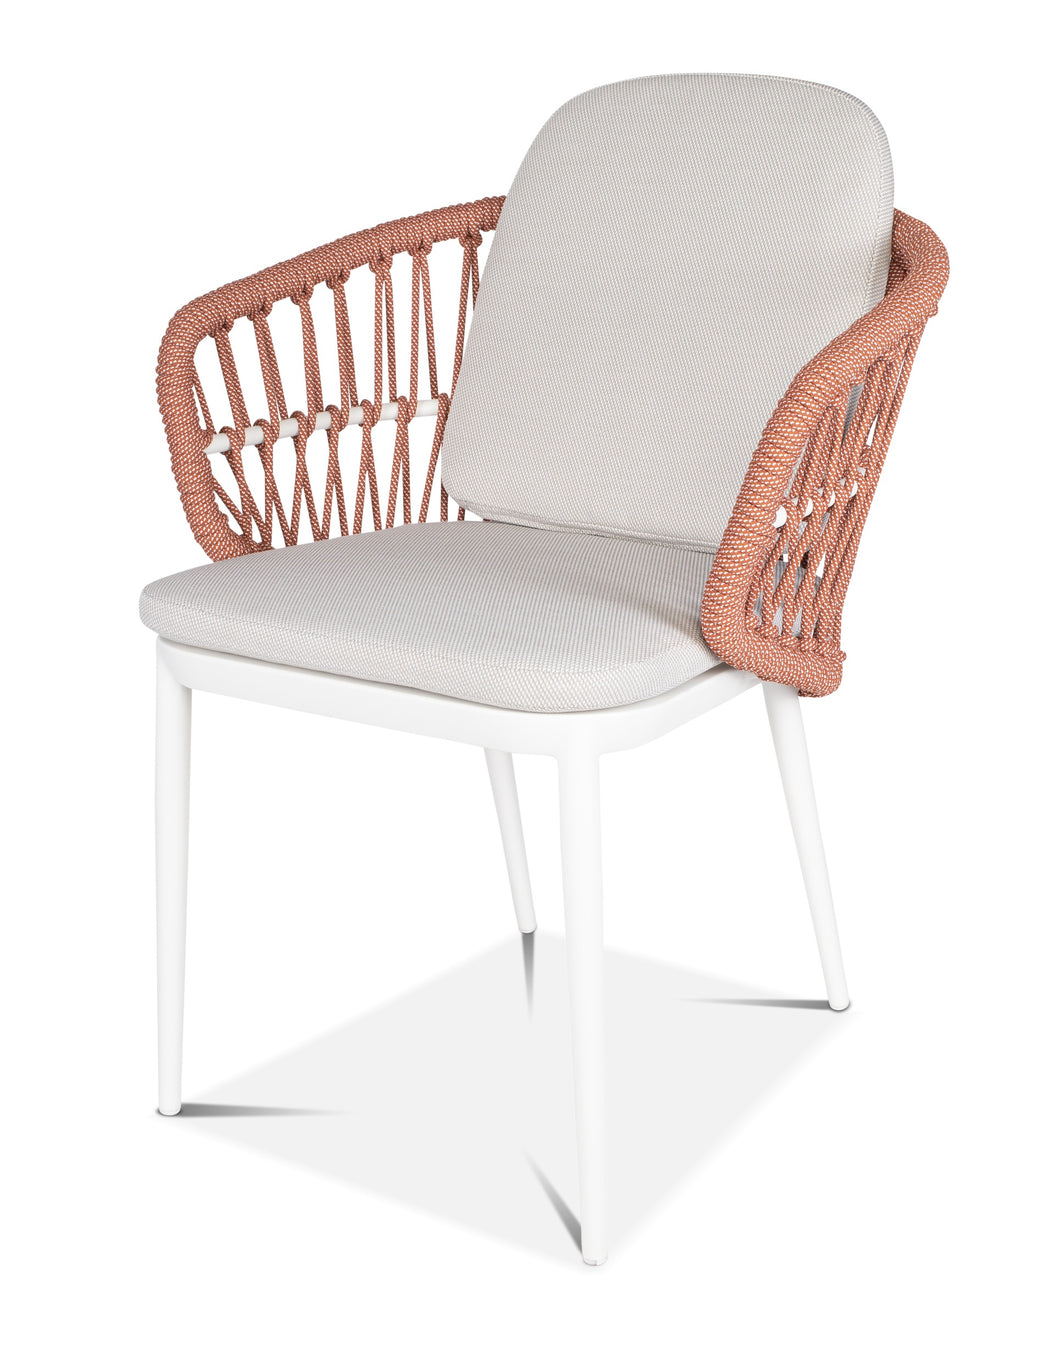 Modena Outdoor Dining Chair